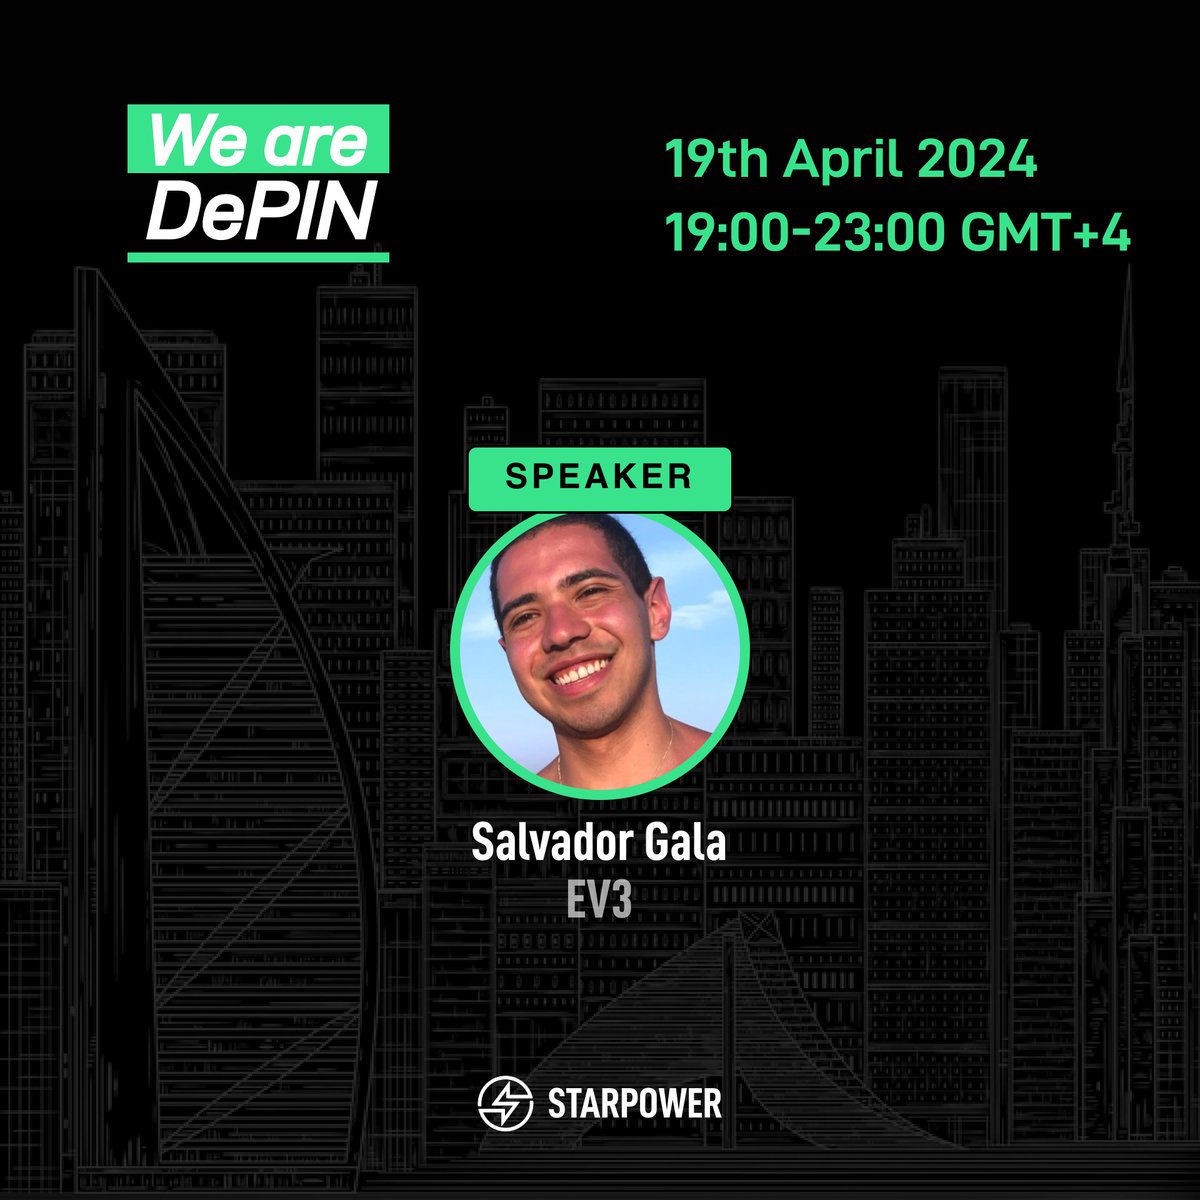 🥳 Meet one of our guest speakers, Salvador Gala, Founder of @EV3Ventures! 🤝 We look forward to kicking off an insightful Starpower DePIN Night in Dubai with all of you! 🍻 #DePIN #Starpower #Dubai #token2049